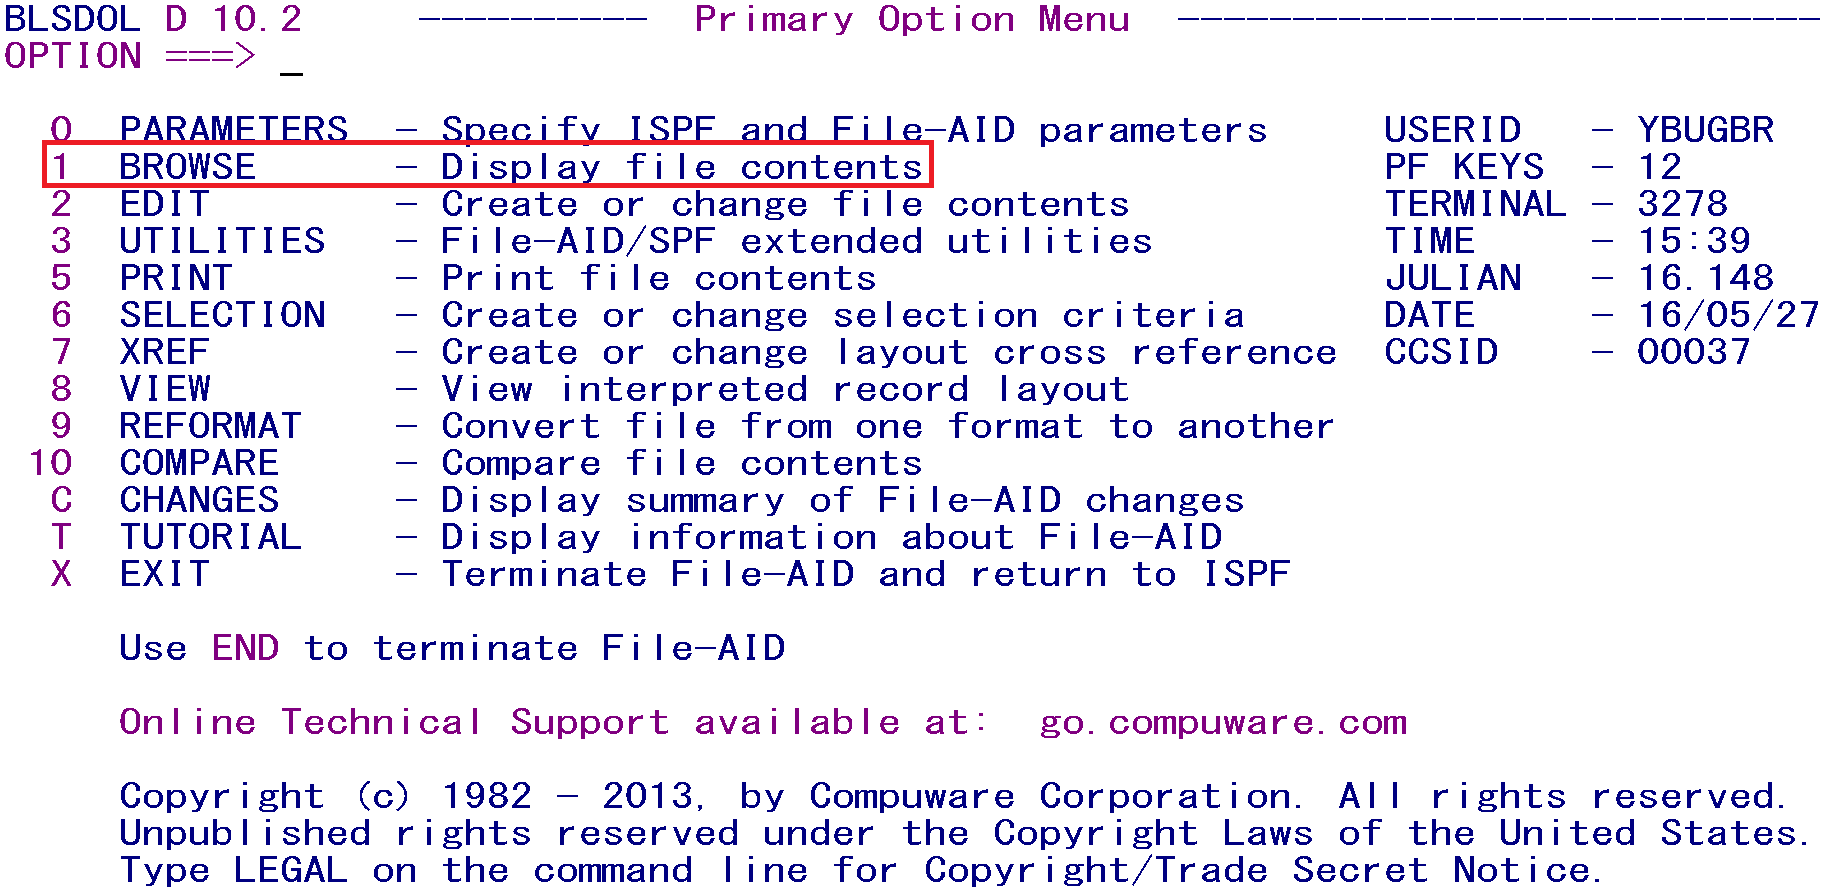 060 - display file contents.png